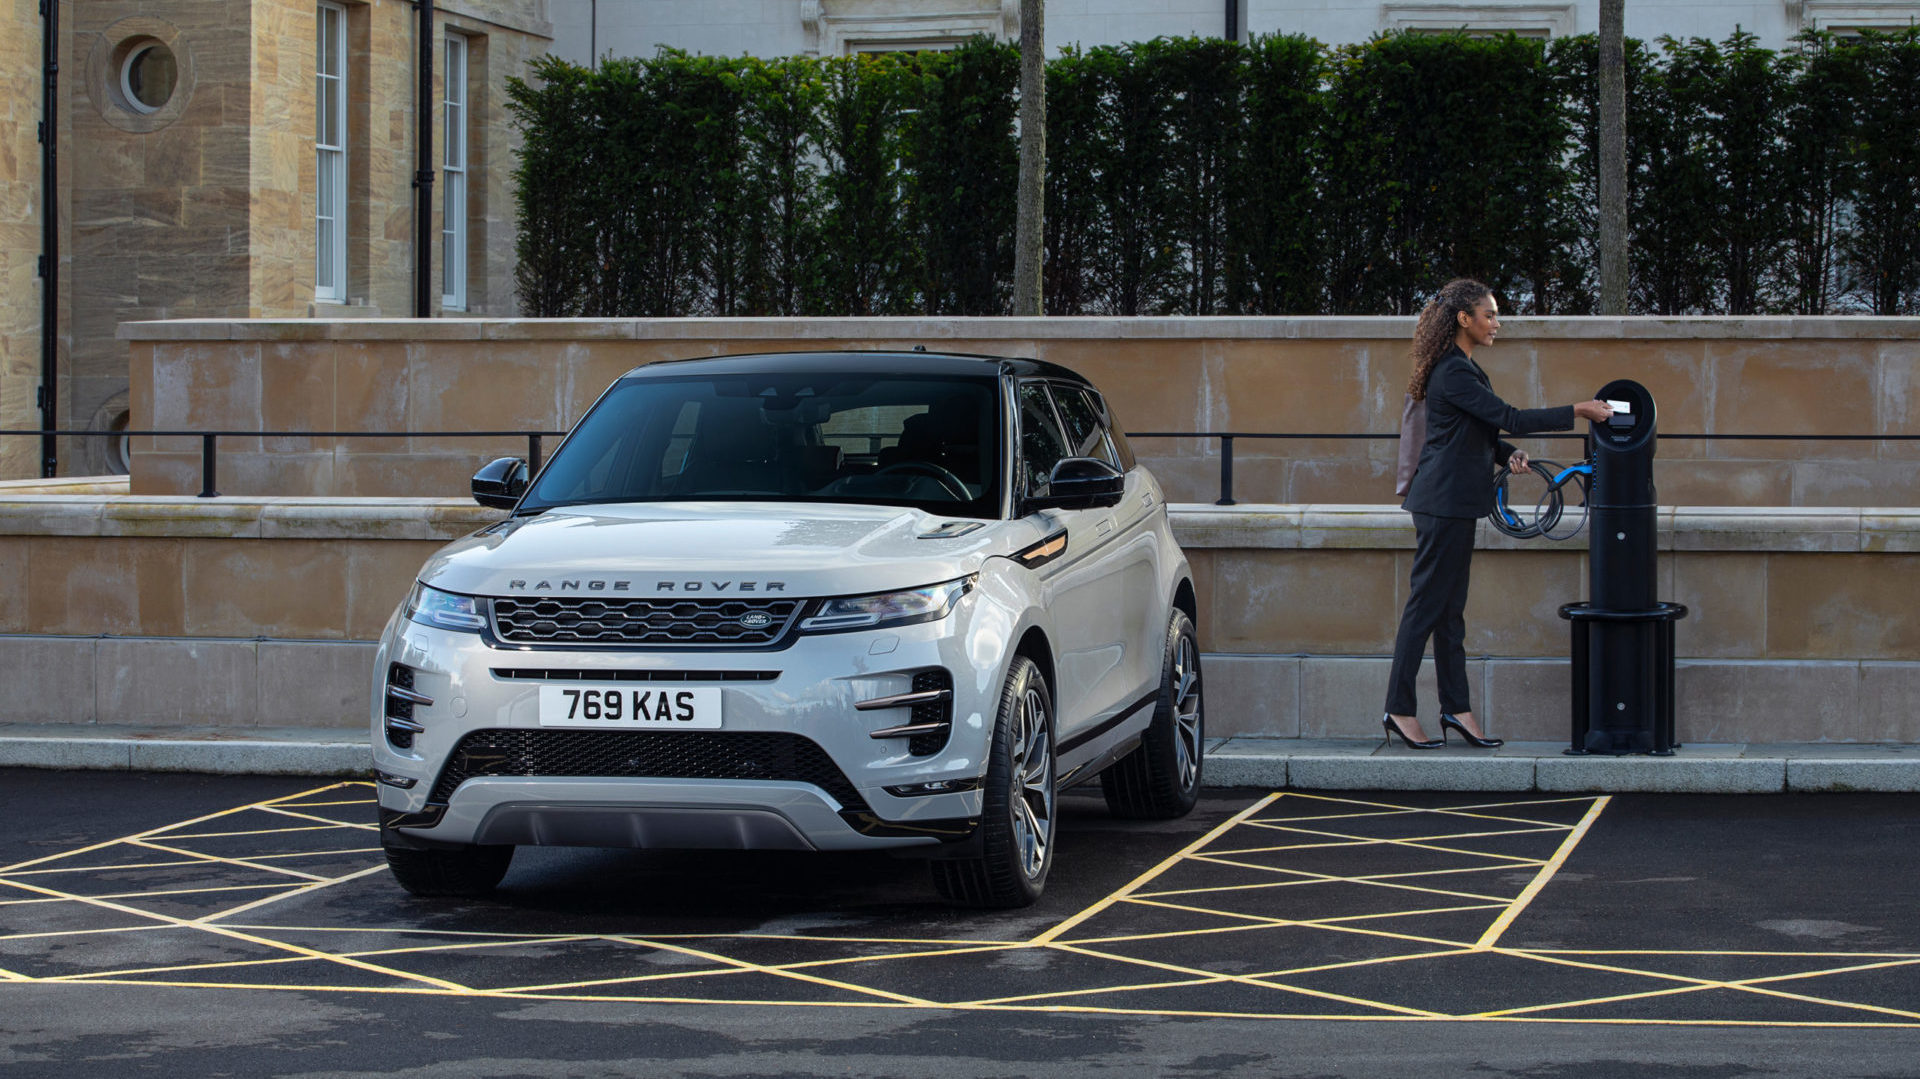 2017 Land Rover Range Rover Evoque Review, Pricing, & Pictures